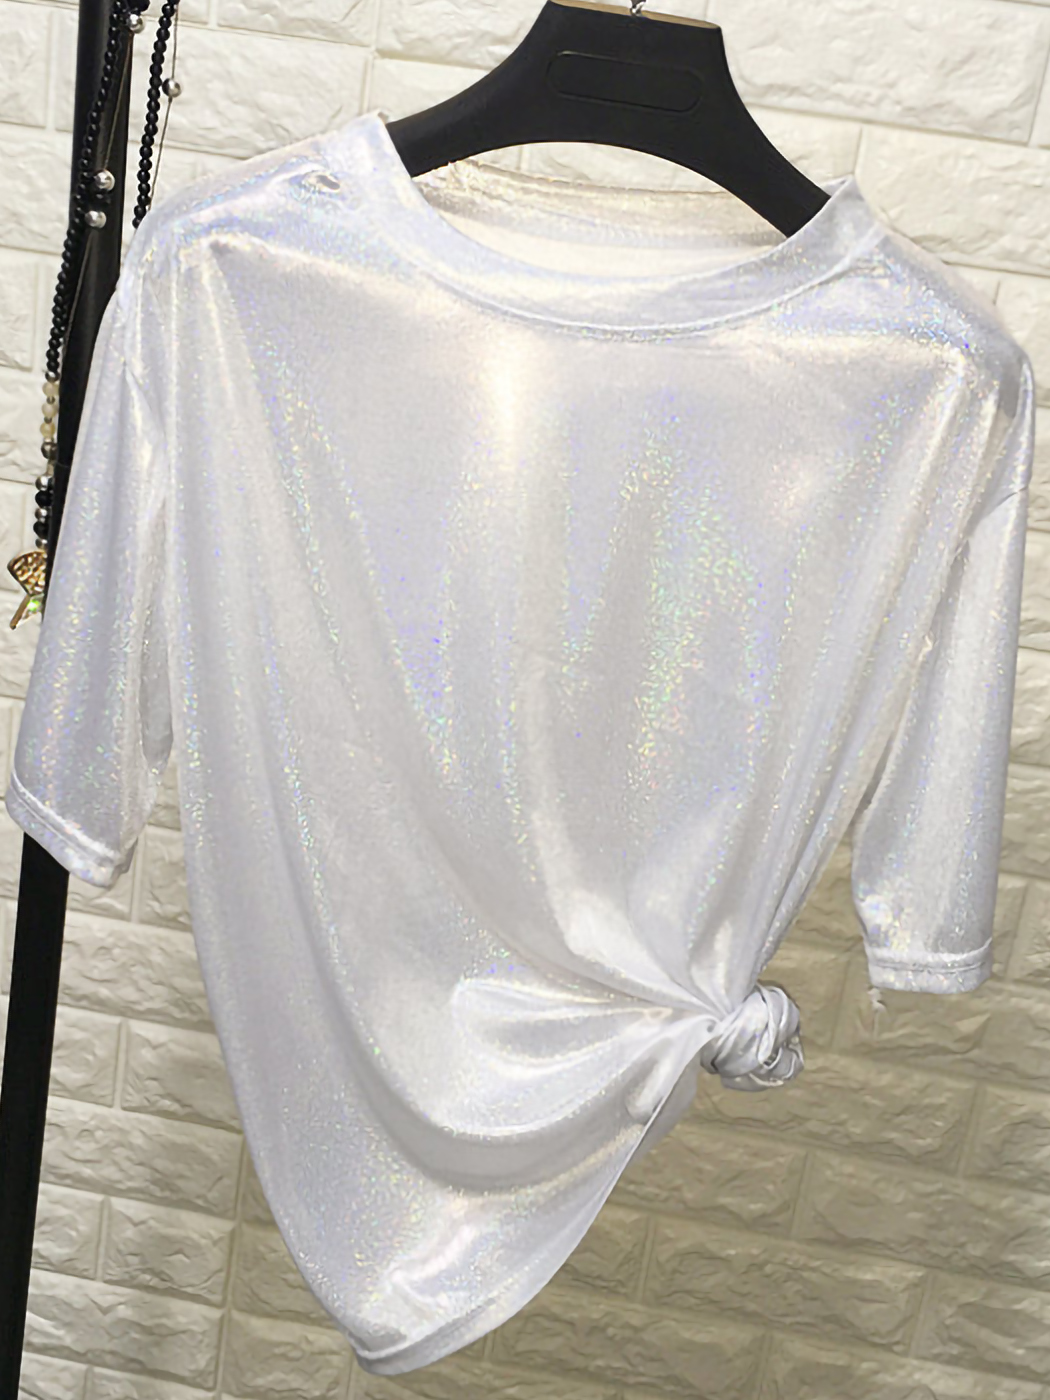 Women's Holographic Metallic Shirt Ultra Soft Top Glitter Party Disco Blouse - image 3 of 6